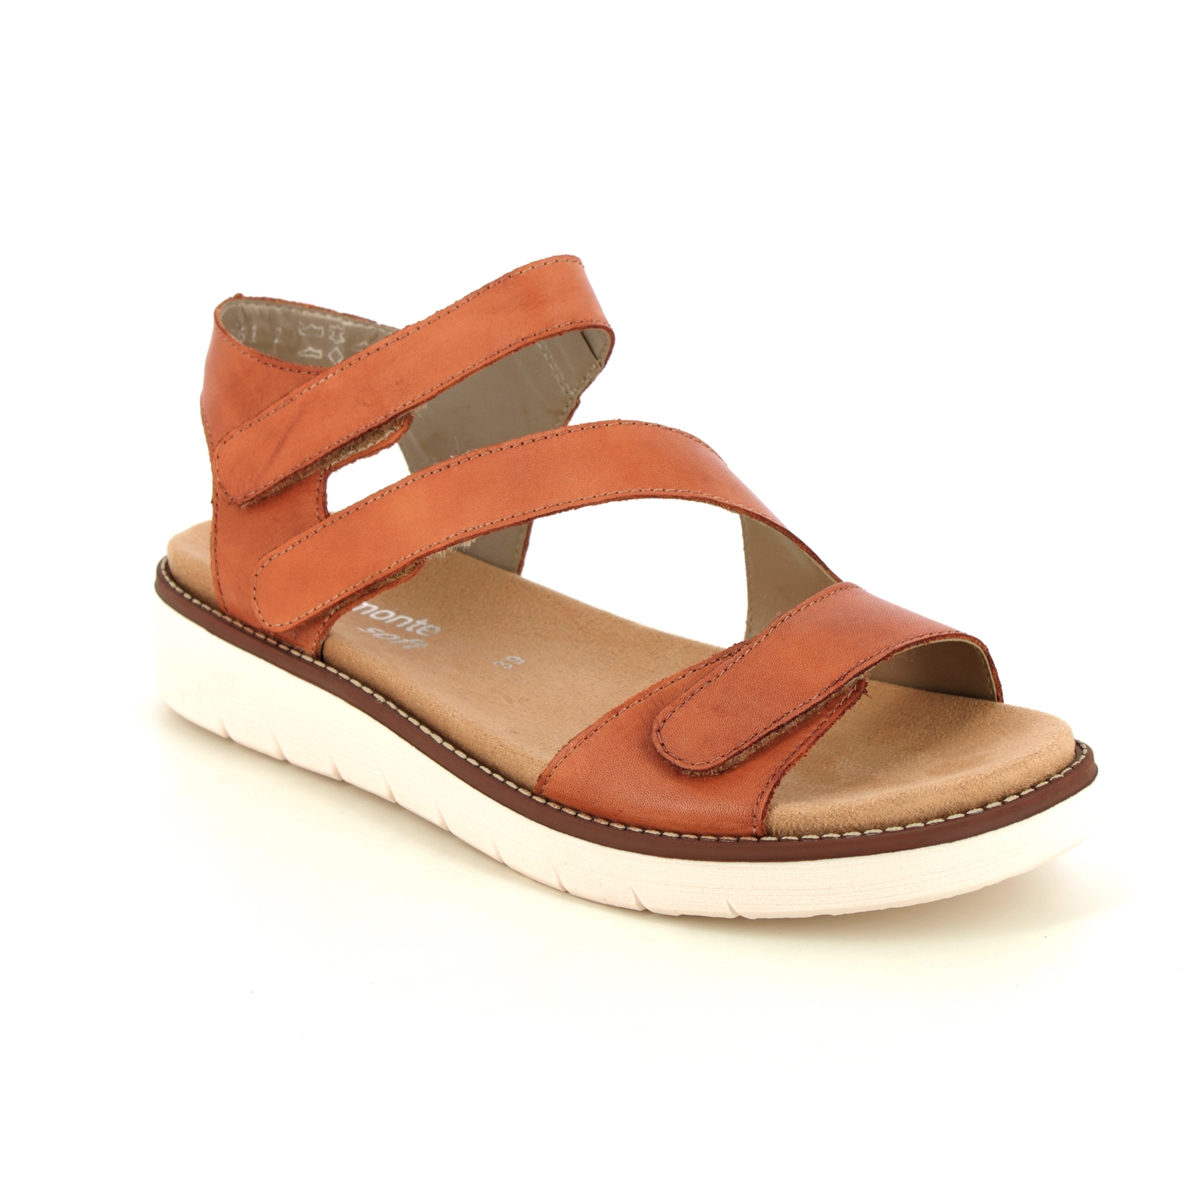 Remonte Marigo Tan Leather Womens Comfortable Sandals D2050-24 In Size 41 In Plain Tan Leather